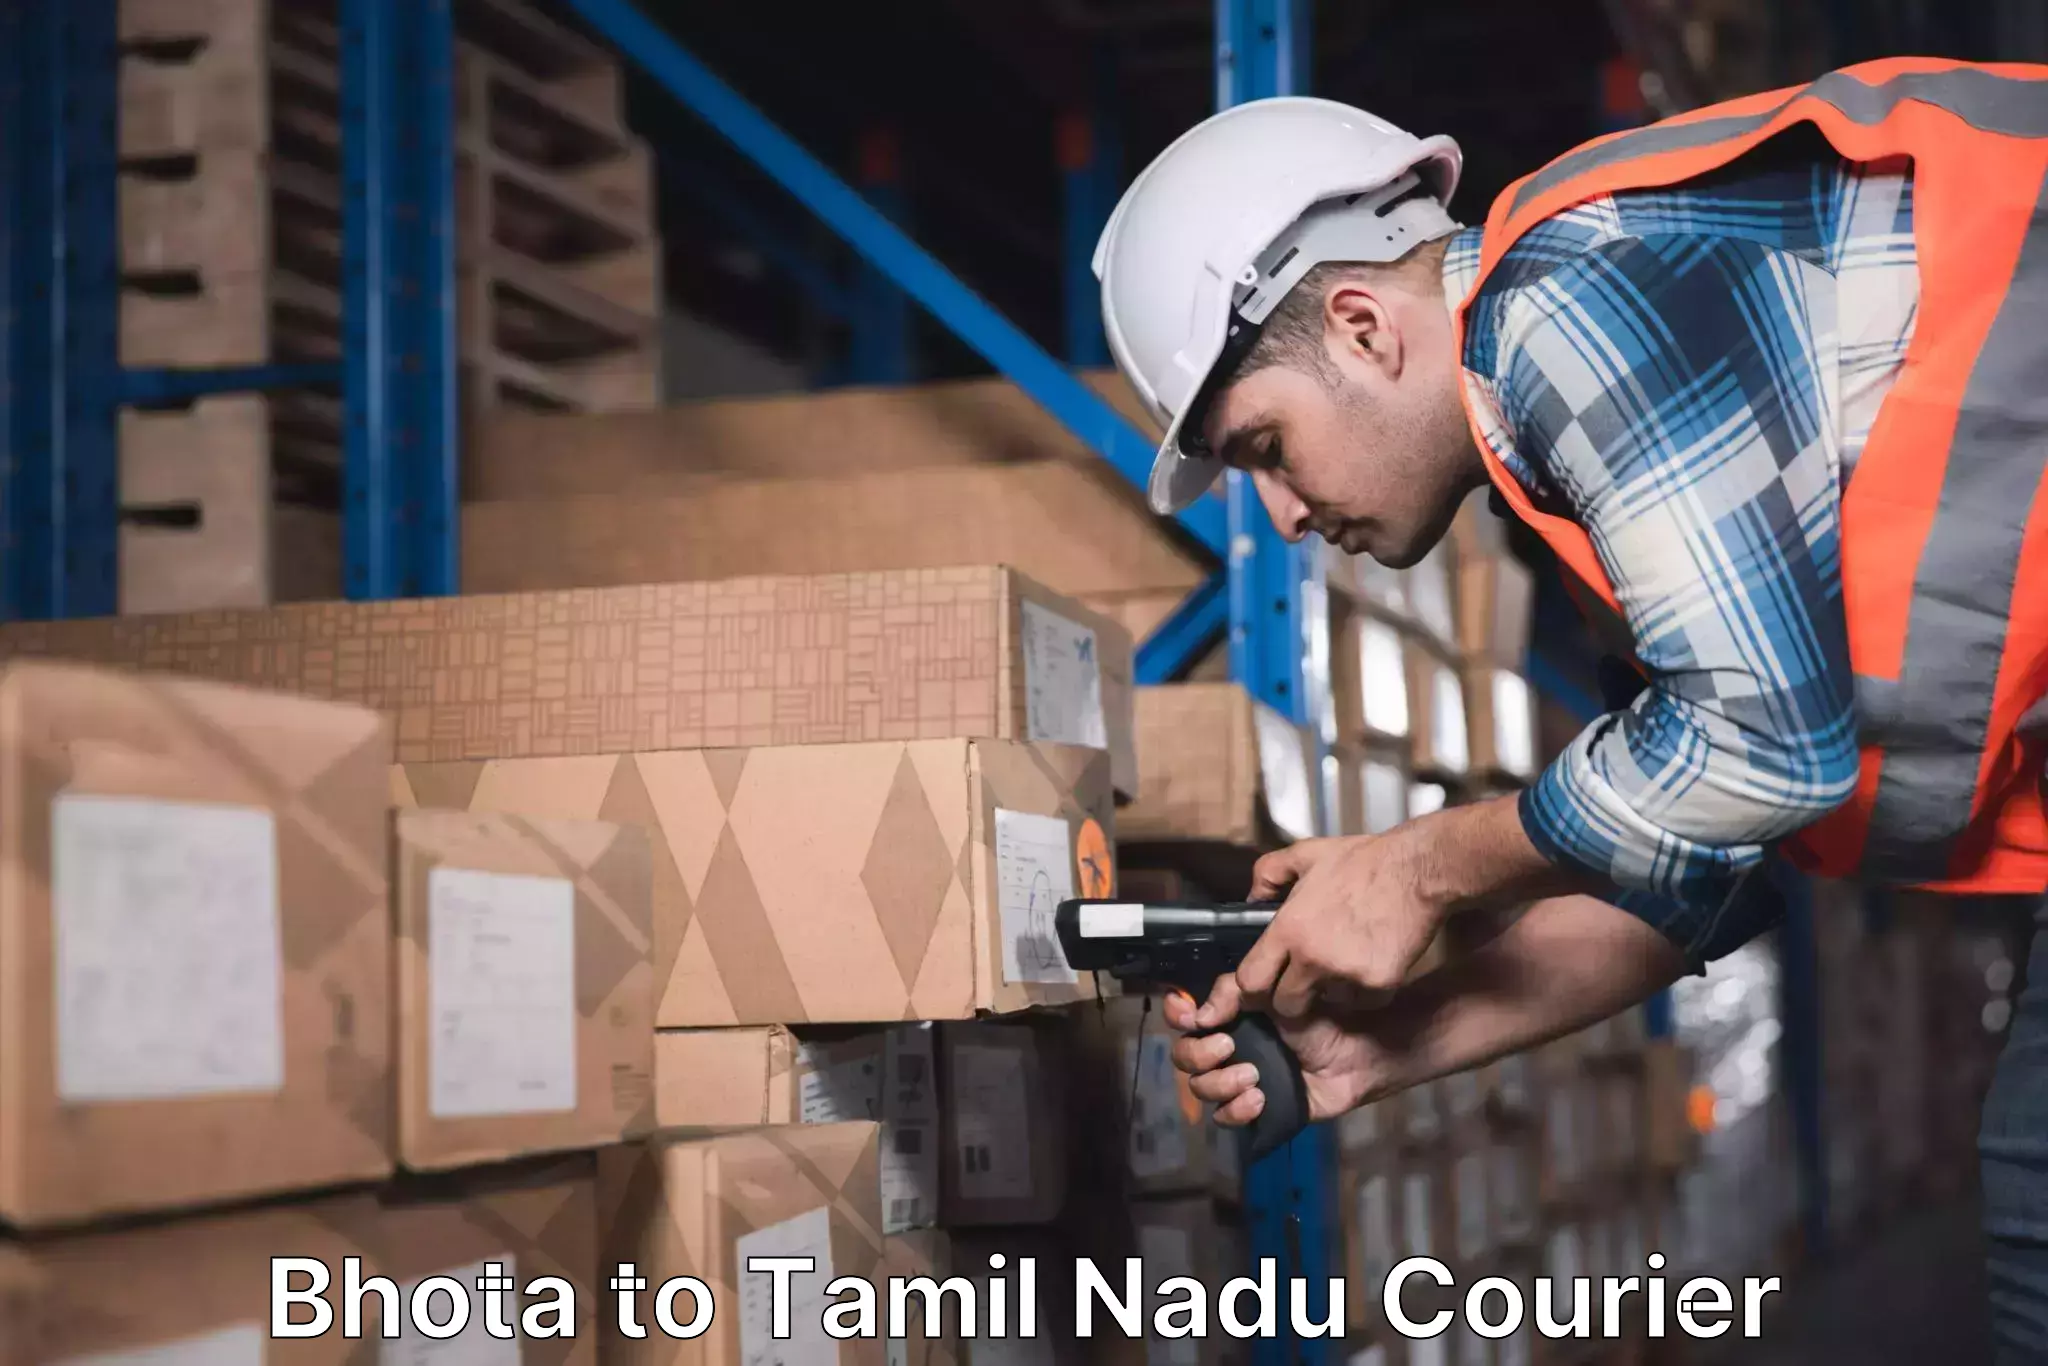 Courier rate comparison Bhota to Tamil Nadu